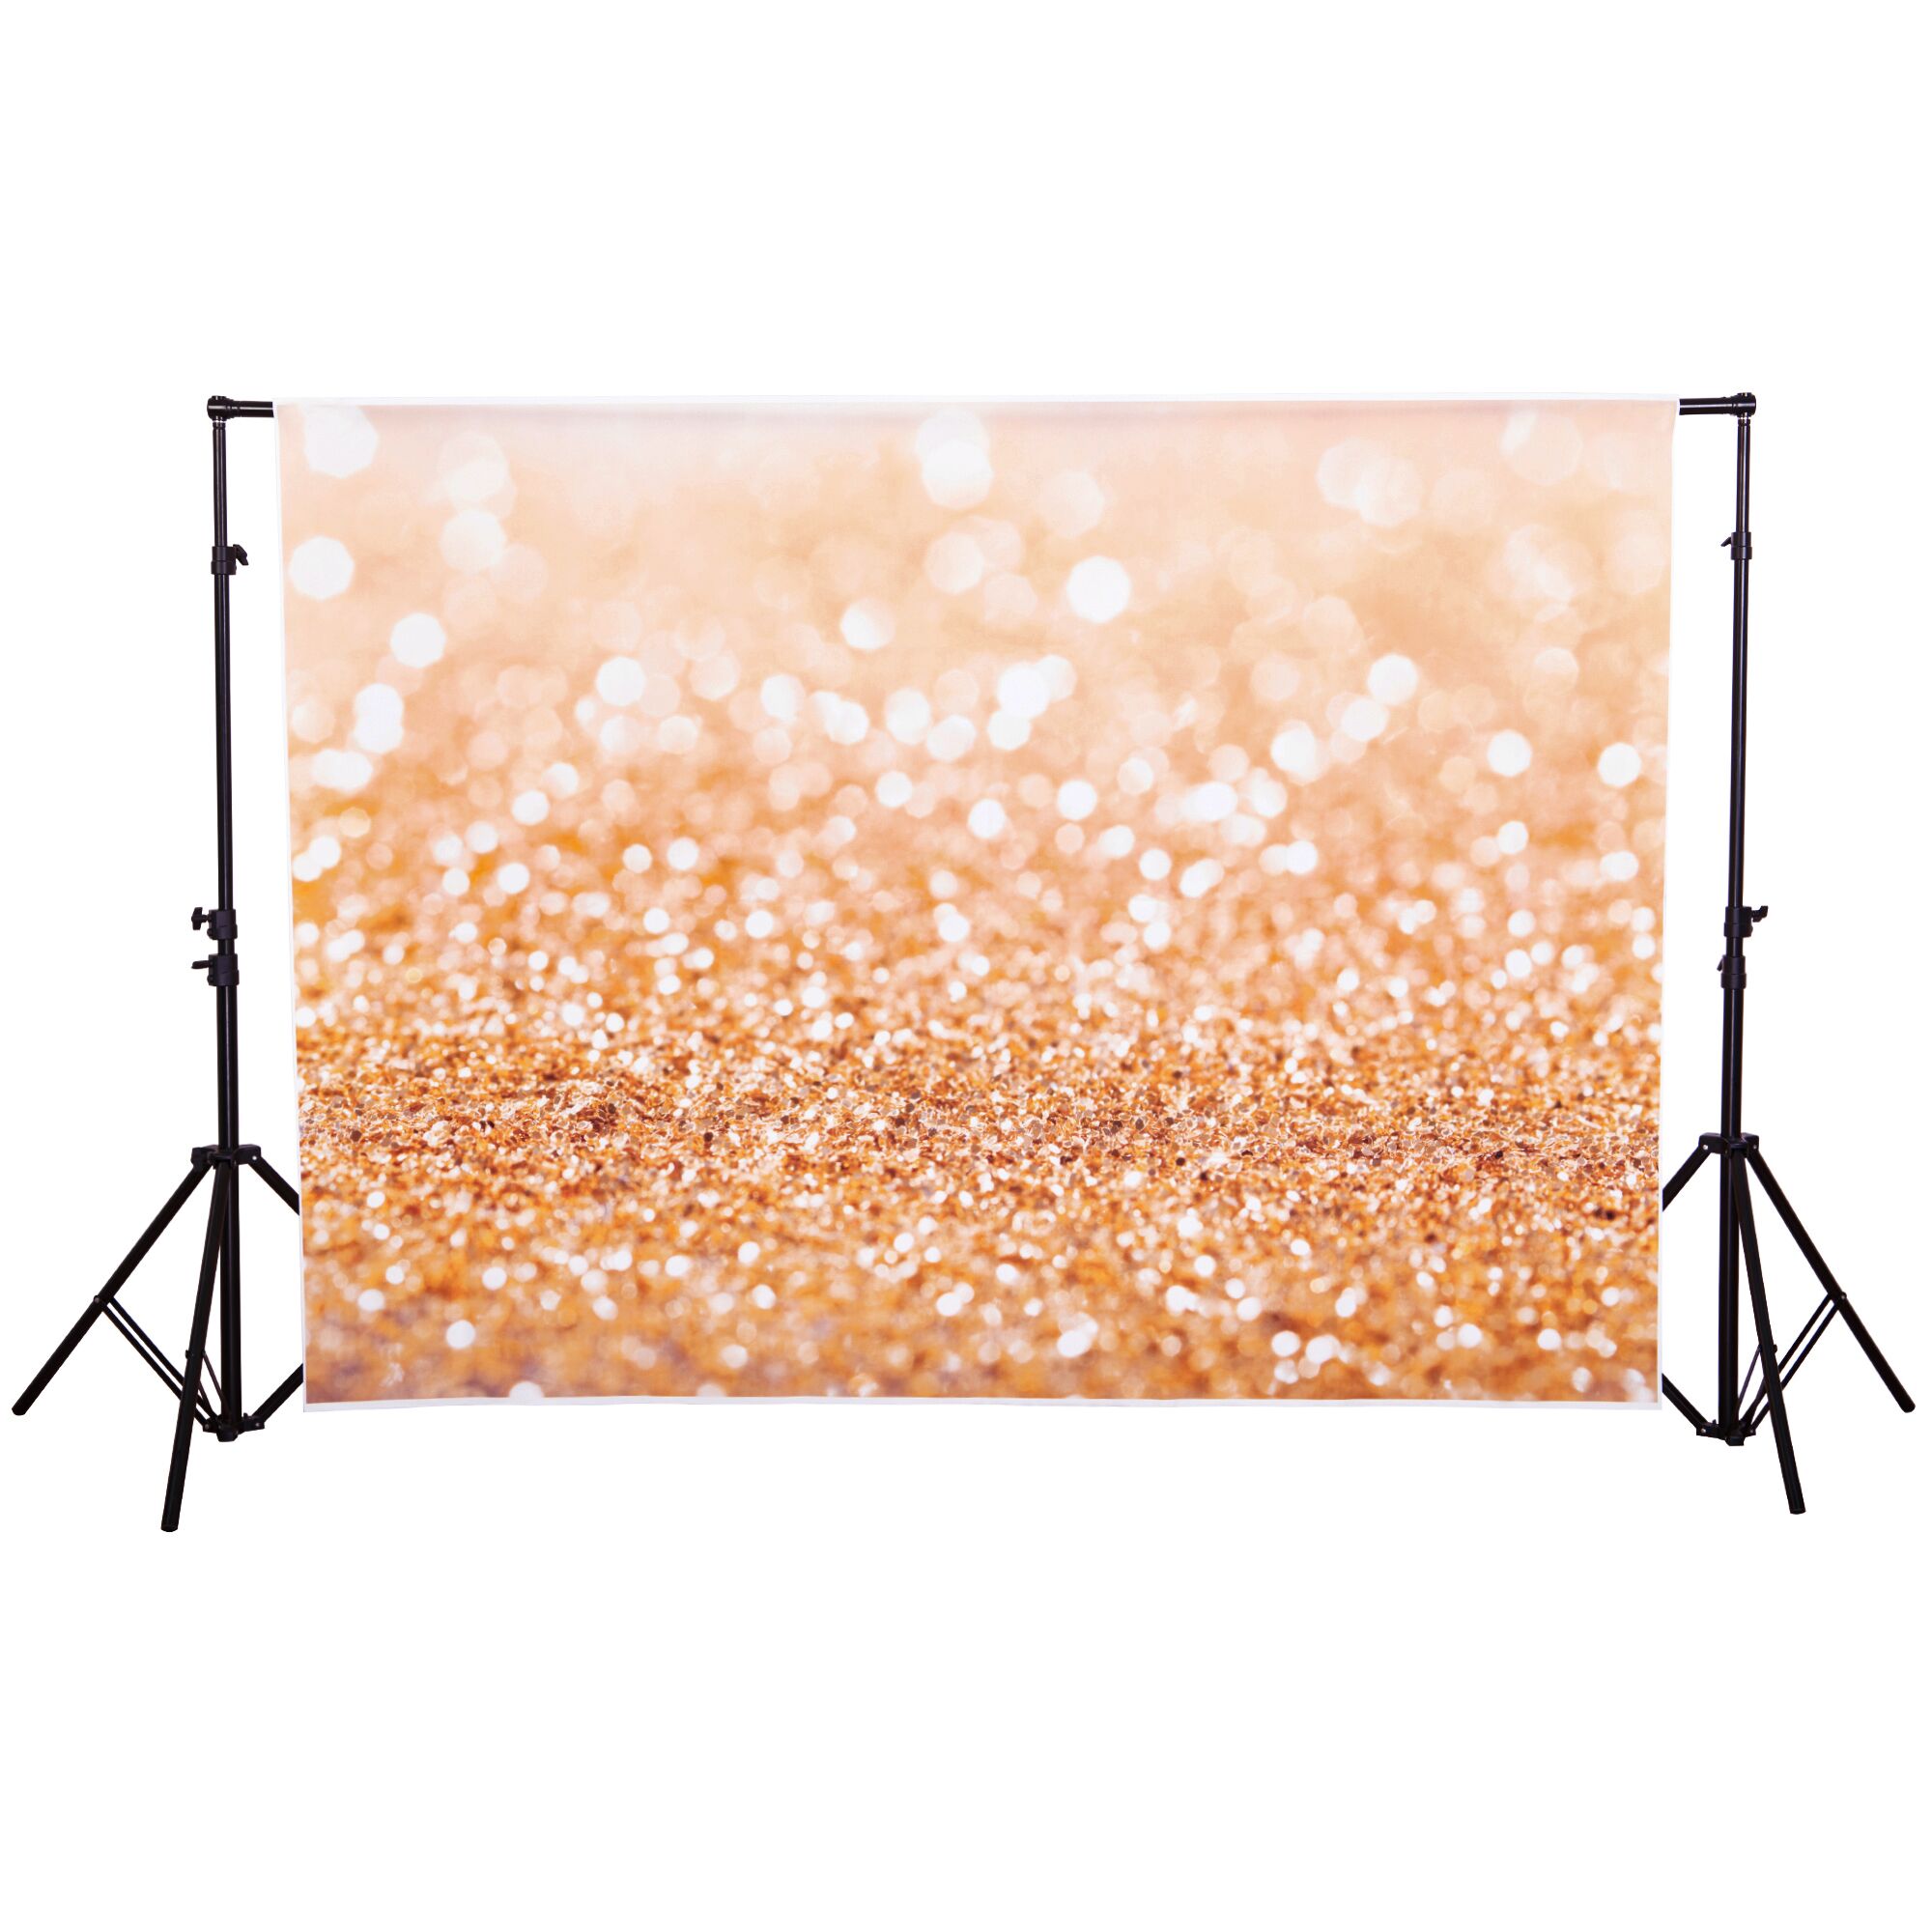 MEETS 5x7ft Natural Scenery Photography Backdrop Peace White Dove Background Themed Party Photo Booth YouTube Backdrop PMT184